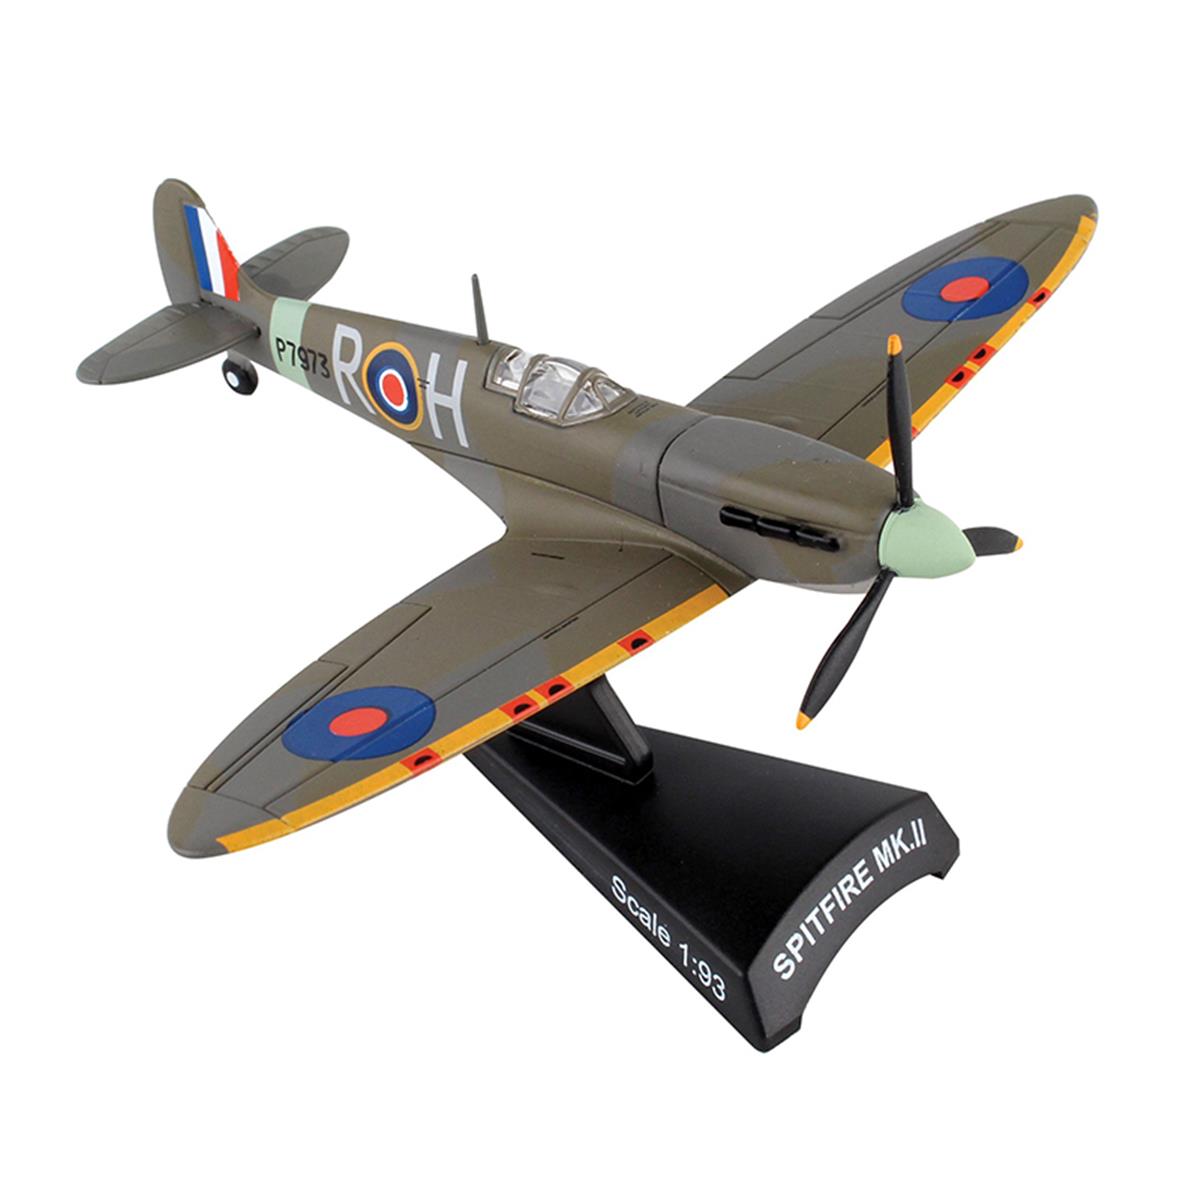 Darps5335-4 1 By 93 Scale Supermarine Spitfire Raaf Postage Stamp Collection Model Airplane